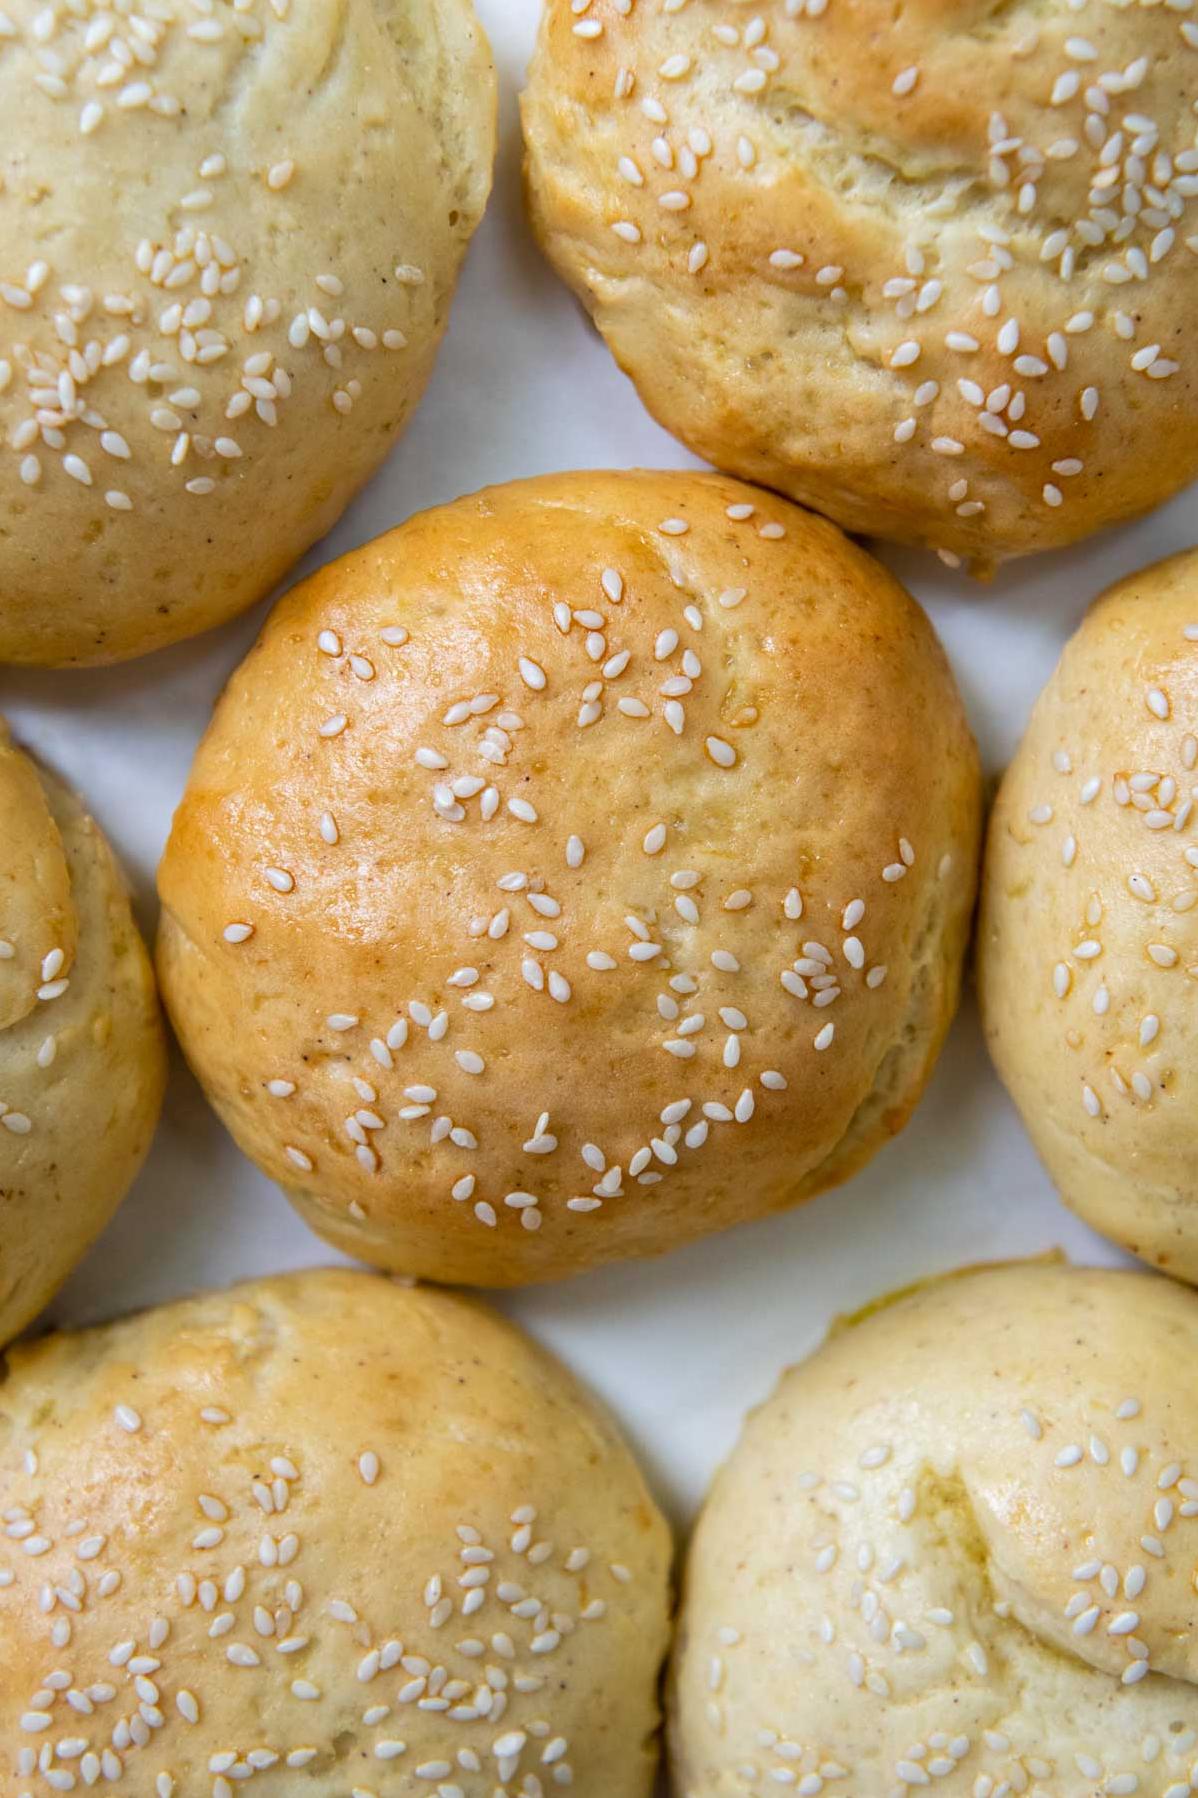  Say goodbye to boring store-bought buns and hello to homemade goodness.